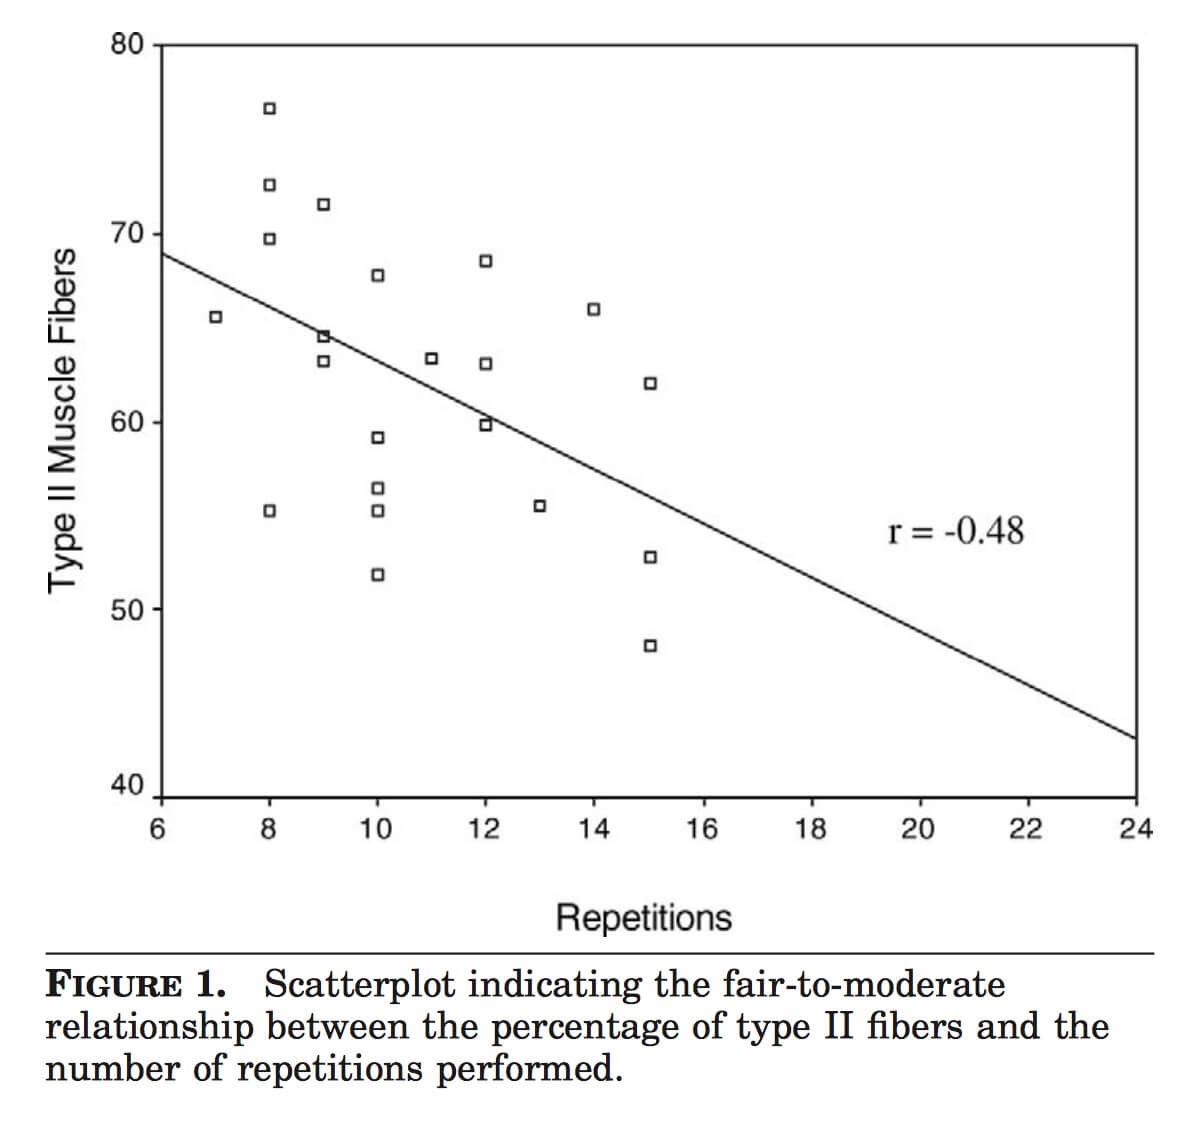 From Douris et. Al: http://journals.lww.com/nsca-jscr/Abstract/2006/08000/THE_RELATIONSHIP_BETWEEN_MAXIMAL_REPETITION.36.aspx